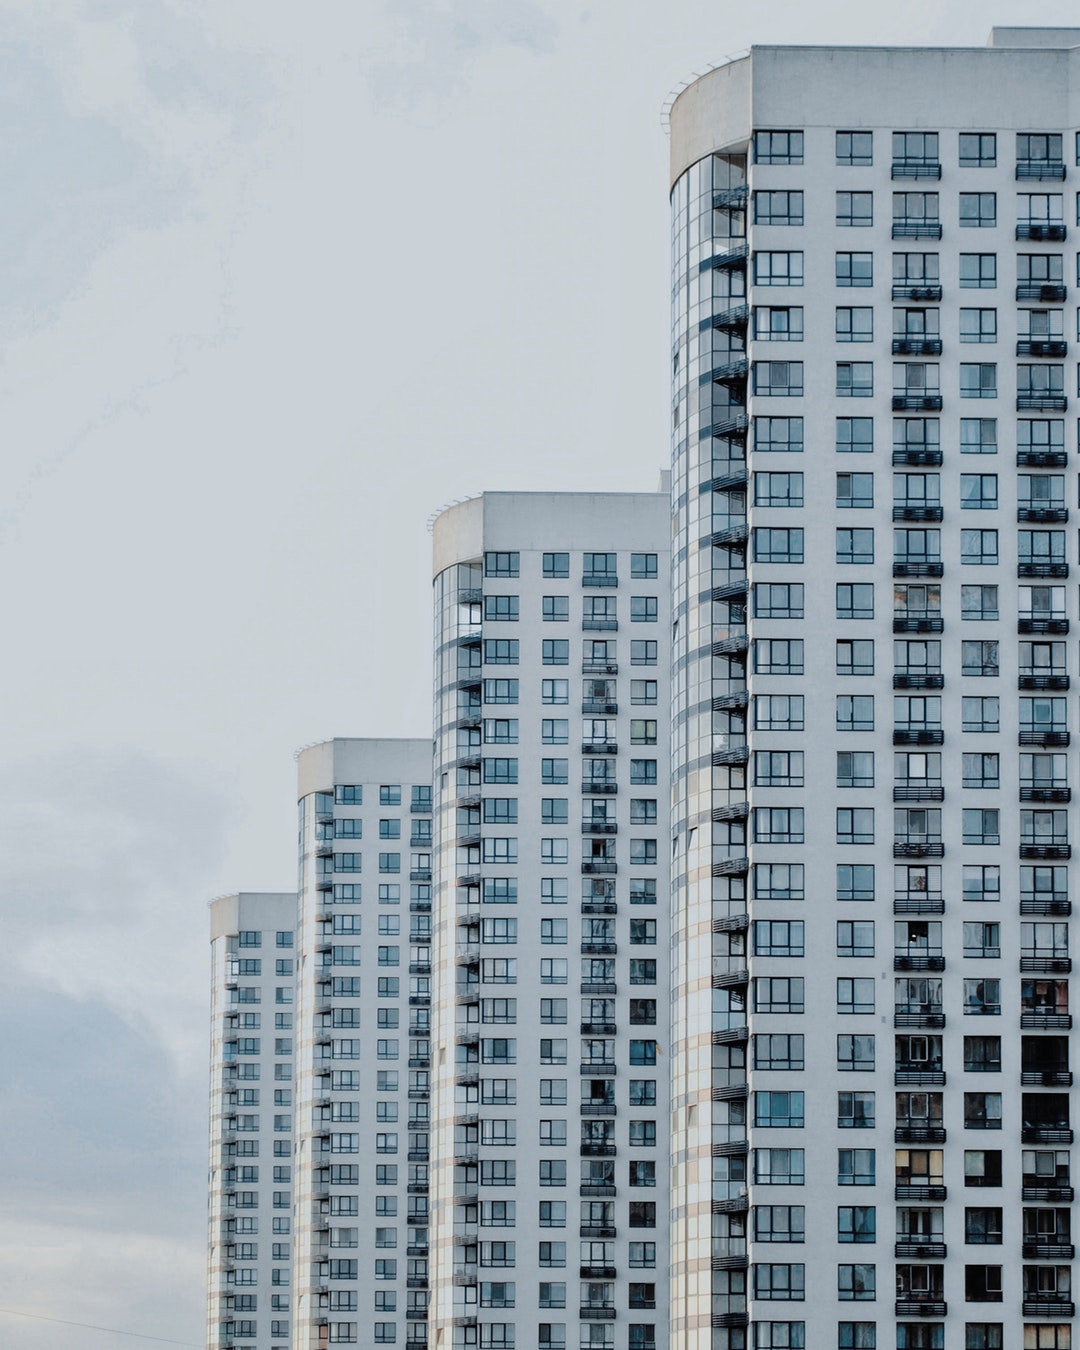 Finding the right condominium for your living situation requires knowing what not to do. Here are common condo buying errors and how to avoid them.